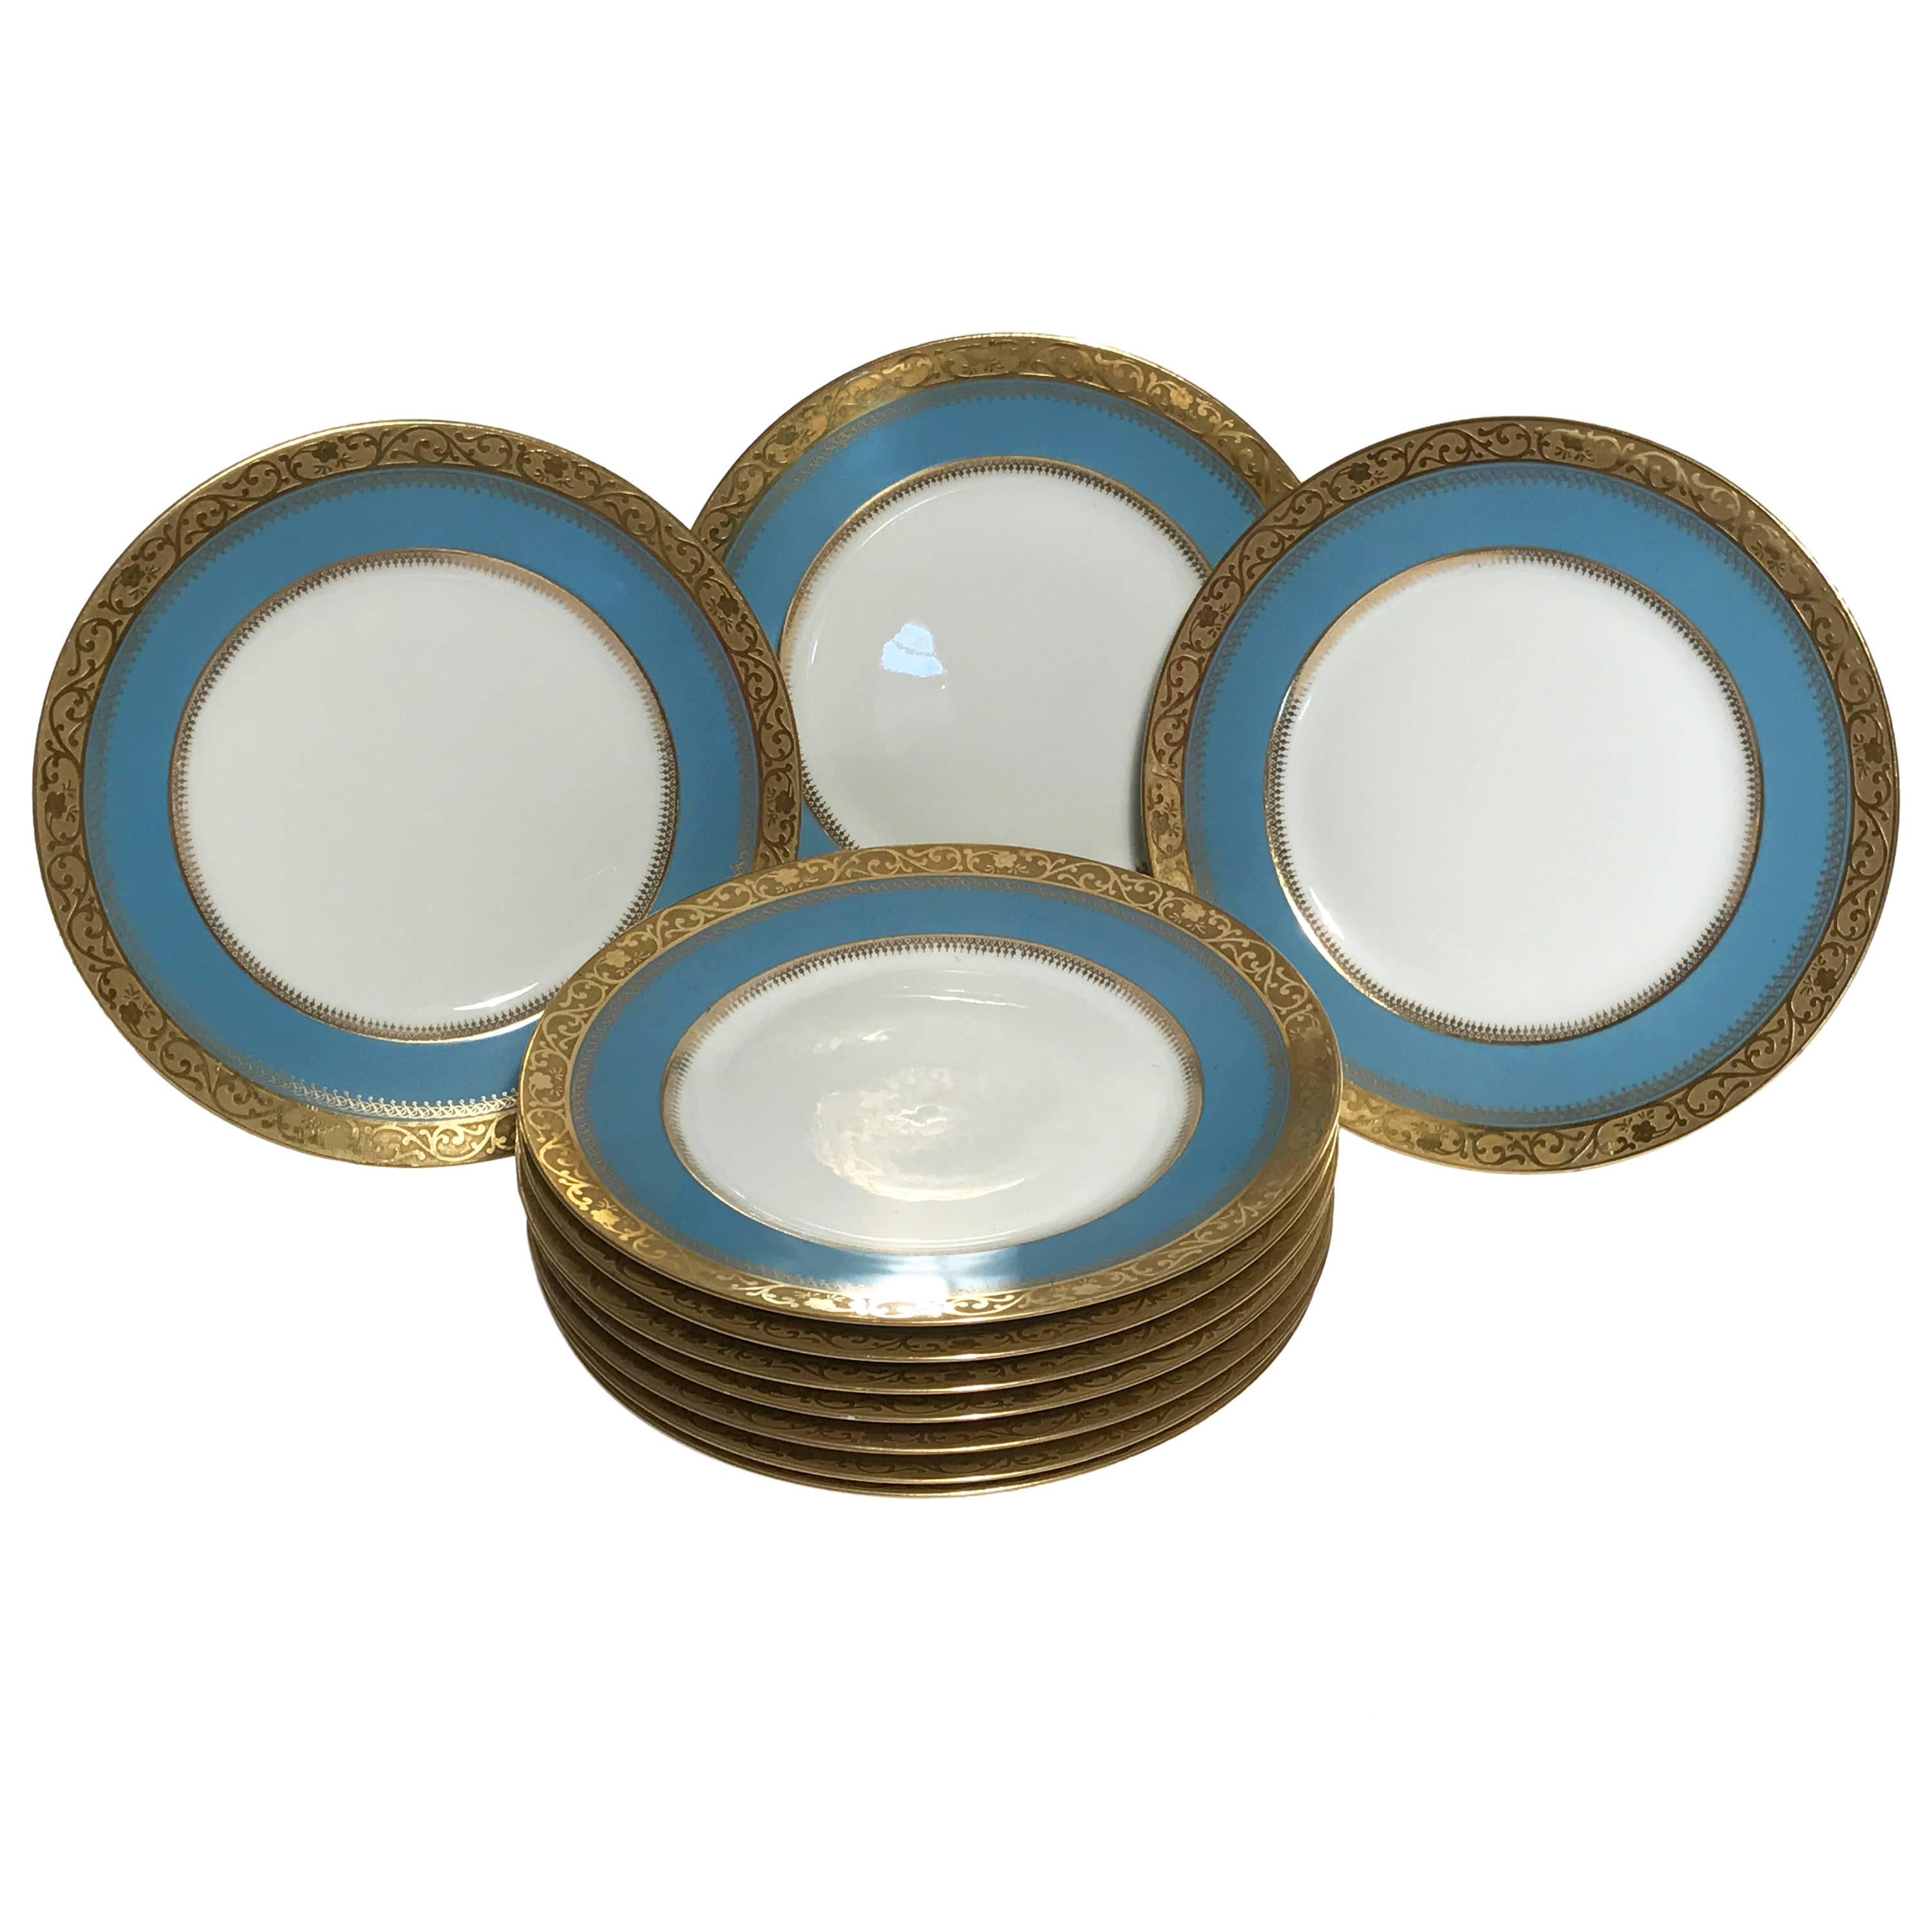 Ten Antique Limoges Turquoise Aqua Dinner Plates, Nice Gold Textured Band